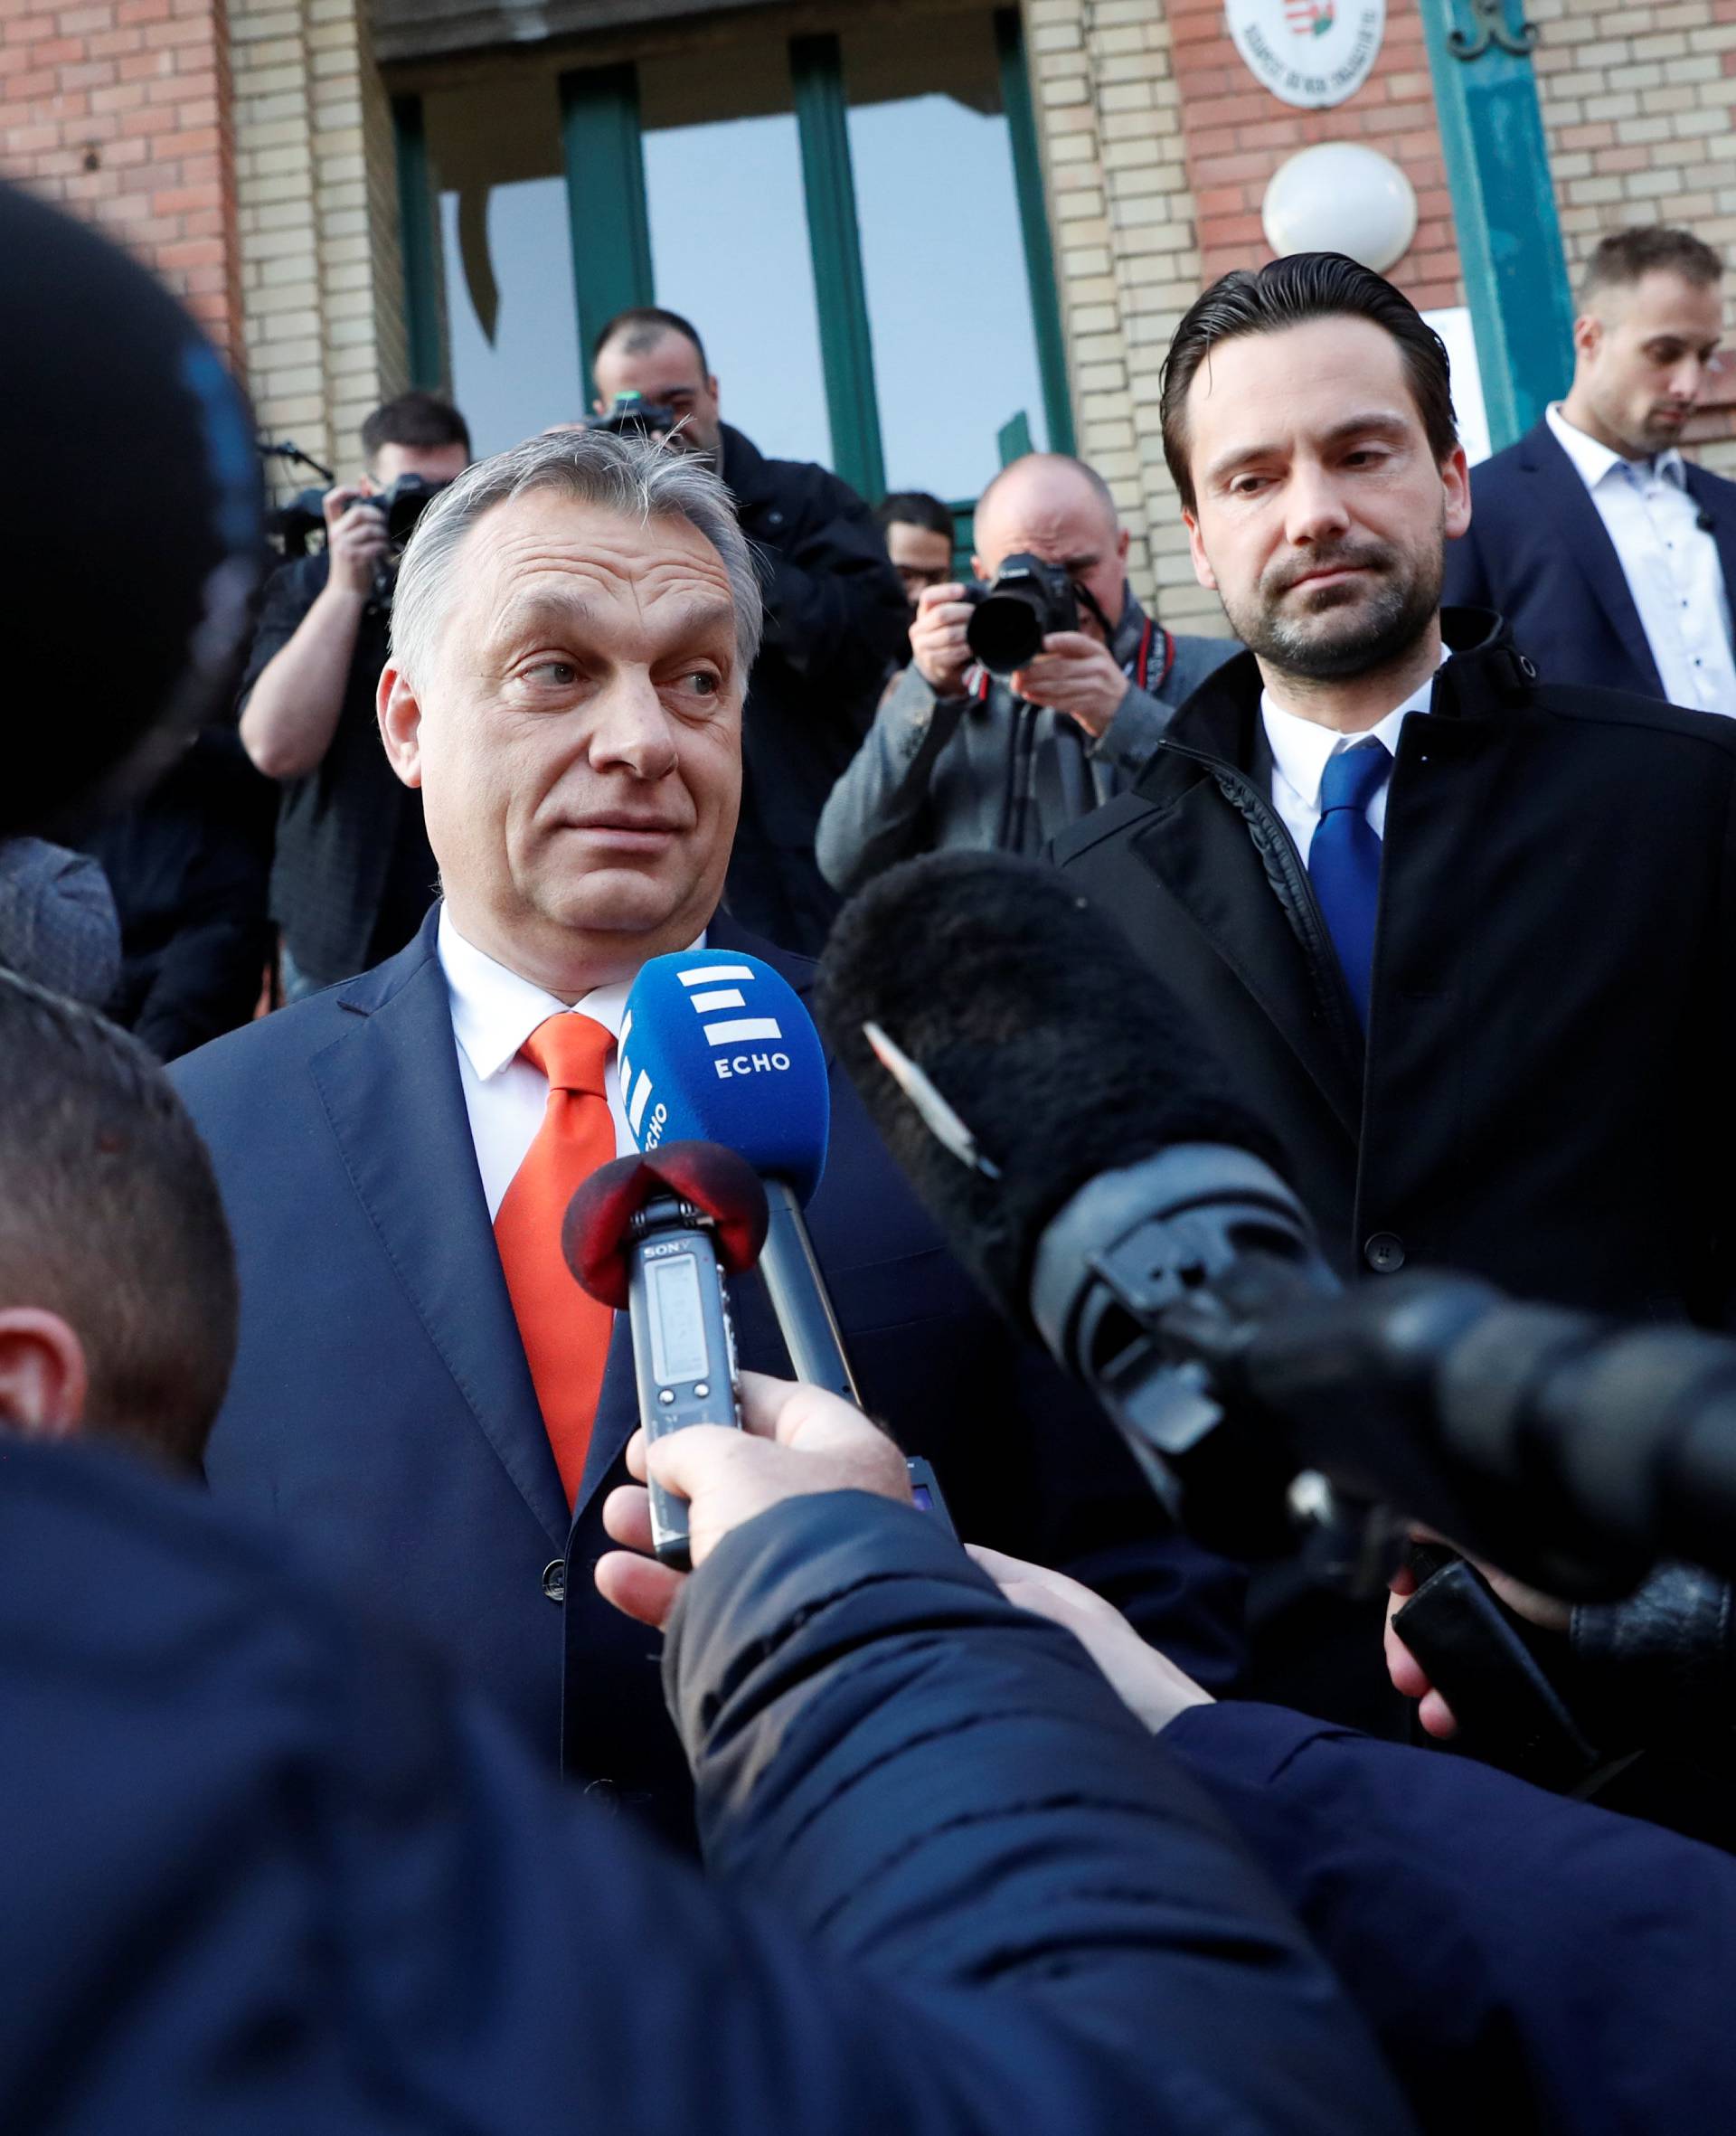 Current Hungarian Prime Minister Viktor Orban gives a statement to the media after leaving a polling station during Hungarian parliamentary election in Budapest